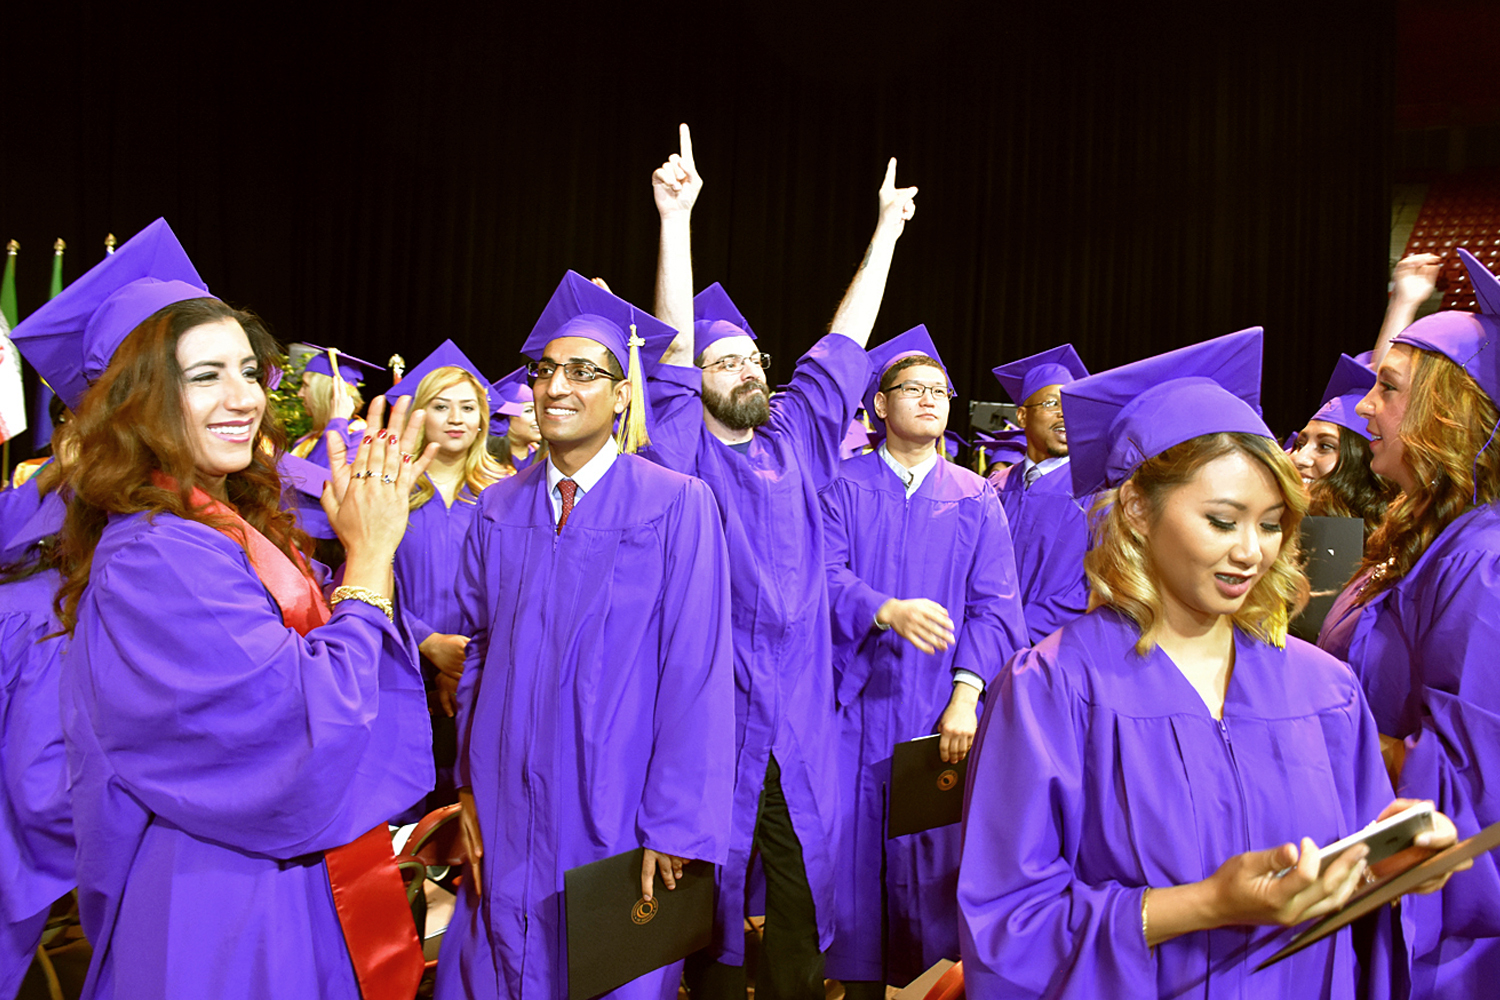 people in purple caps and gowns celebrate with clapping and hands raised in celebration